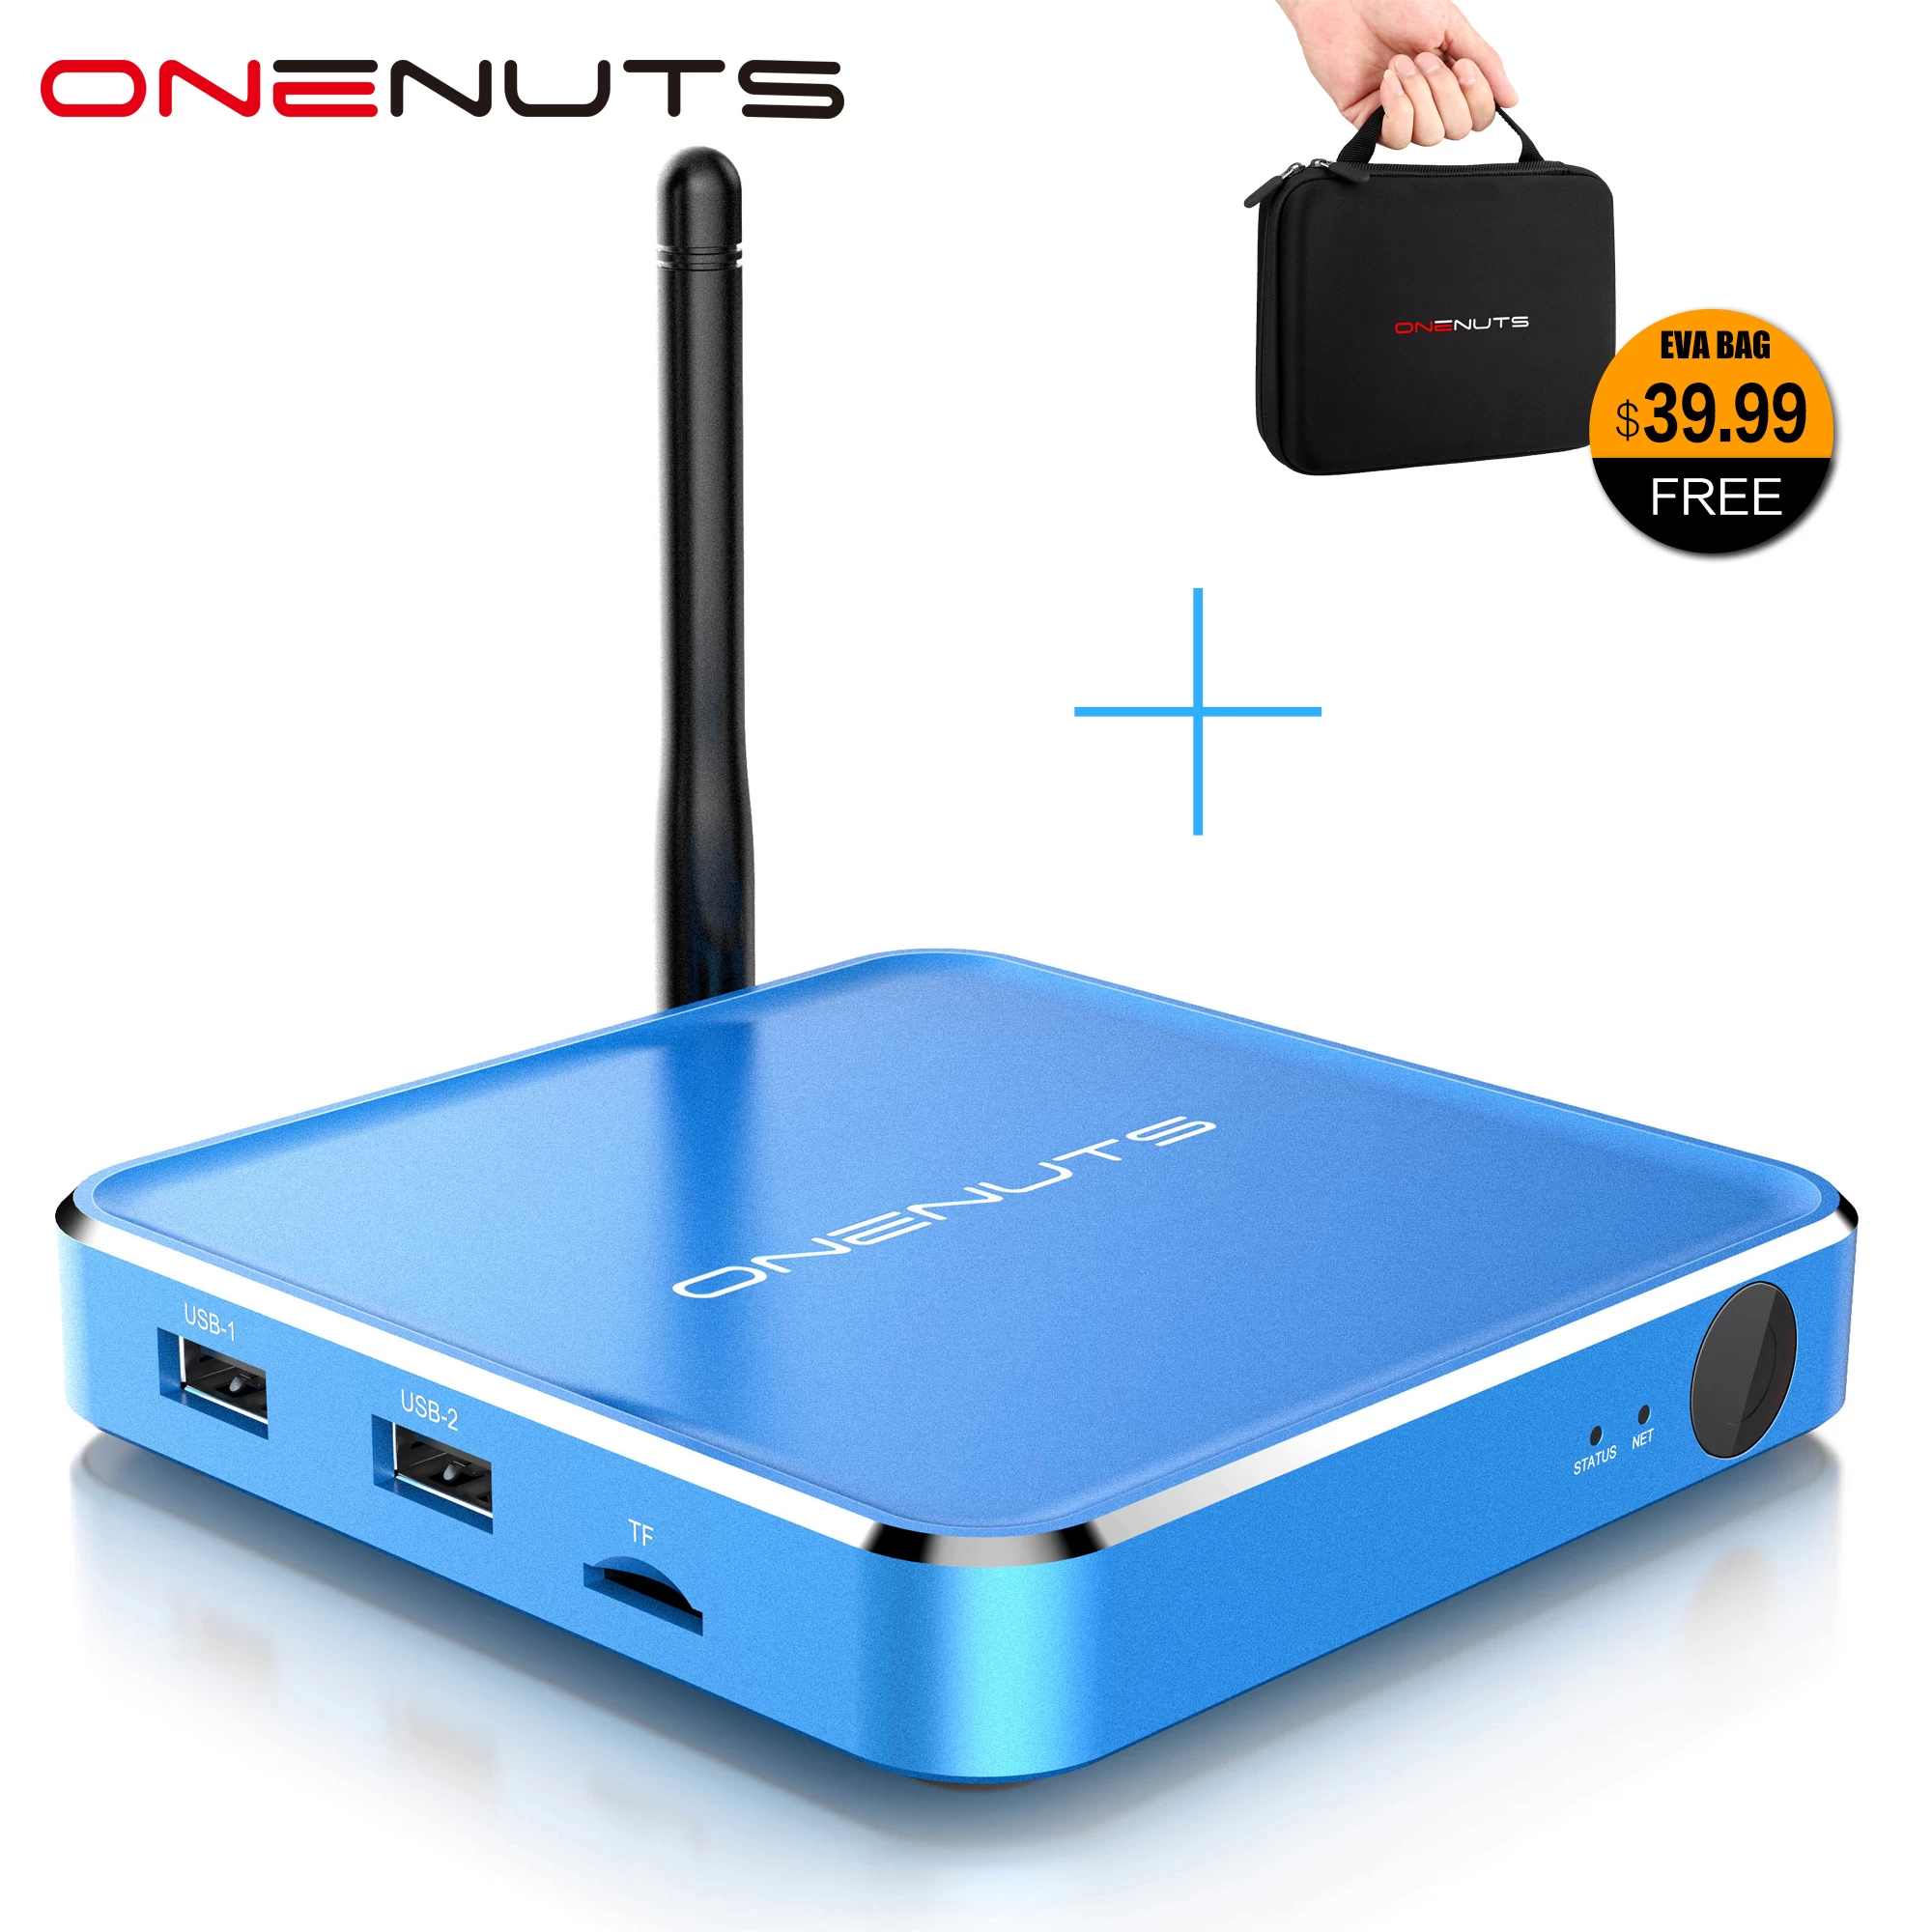 2-in-1 Octa Core Streaming Media Player & Game Android TV Box with Android 6.0 Marshmallow 2G DDR3 16G eMMC Dual-Band AC WIFI support KODI YouTube Netflix Facebook and many more - Onenuts Nut 1 Blue